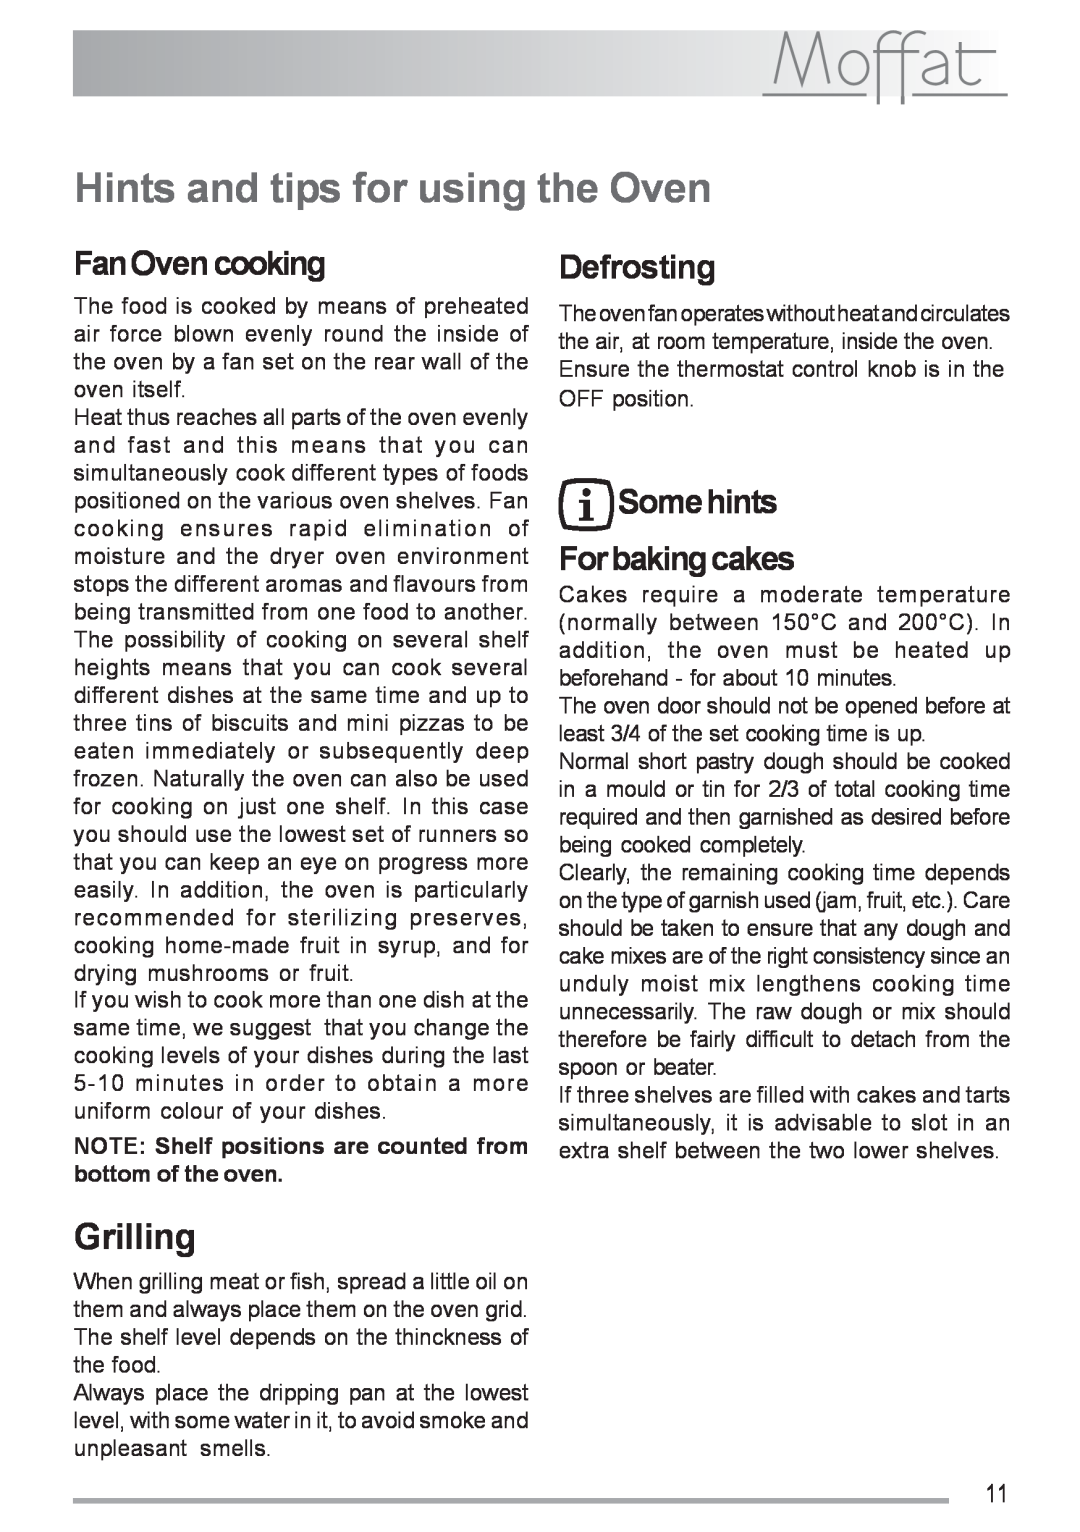 Moffat MSF 616 manual Hints and tips for using the Oven, Grilling, FanOven cooking, Defrosting, Somehints Forbakingcakes 